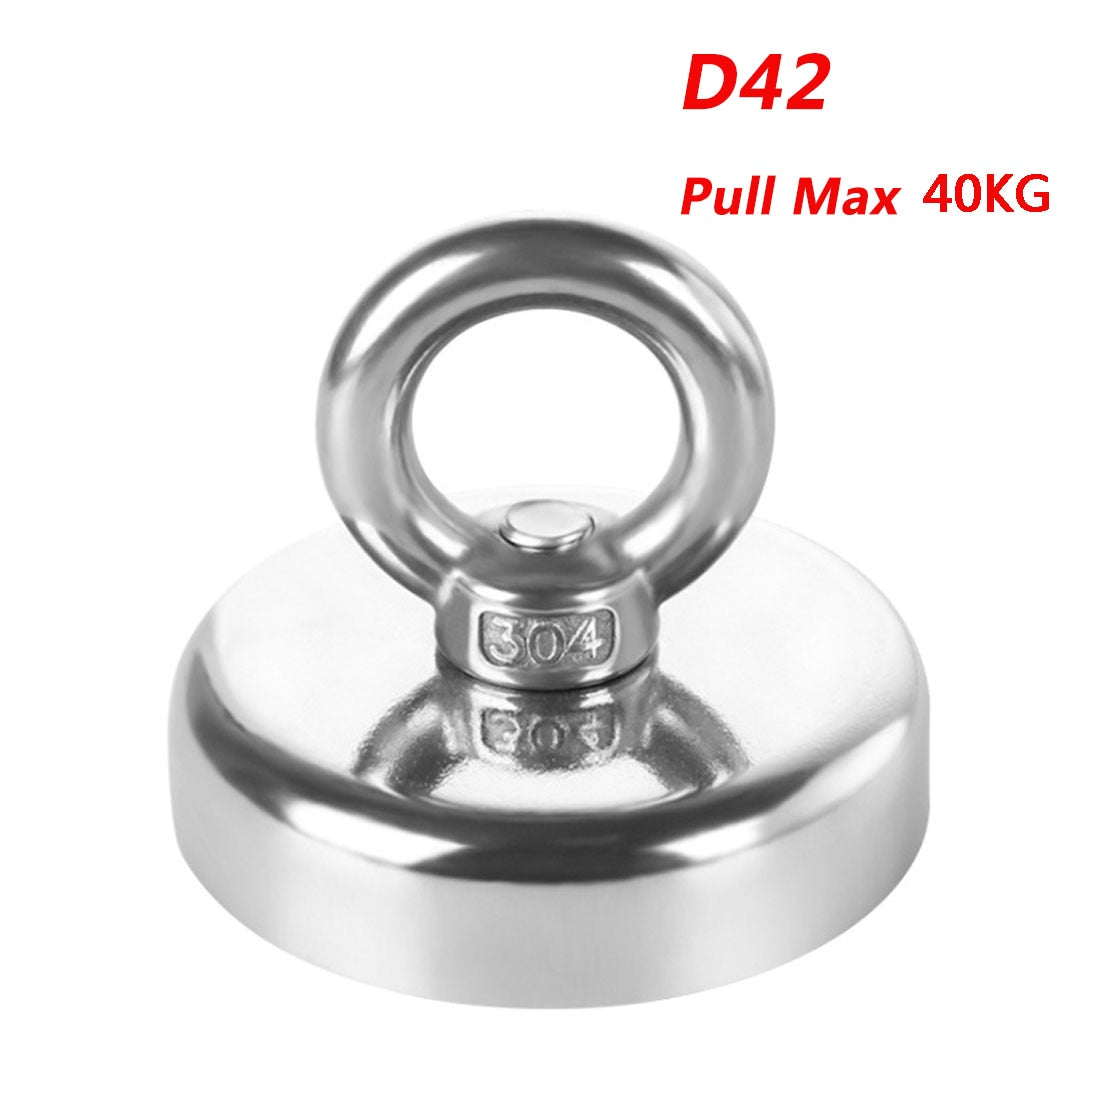 D20 - D90 Search Magnet Ultra Strong Neodymium Magnets Fishing Strong Magnetic Rings Powerful Salvage Magnet Rare Earth Magnets